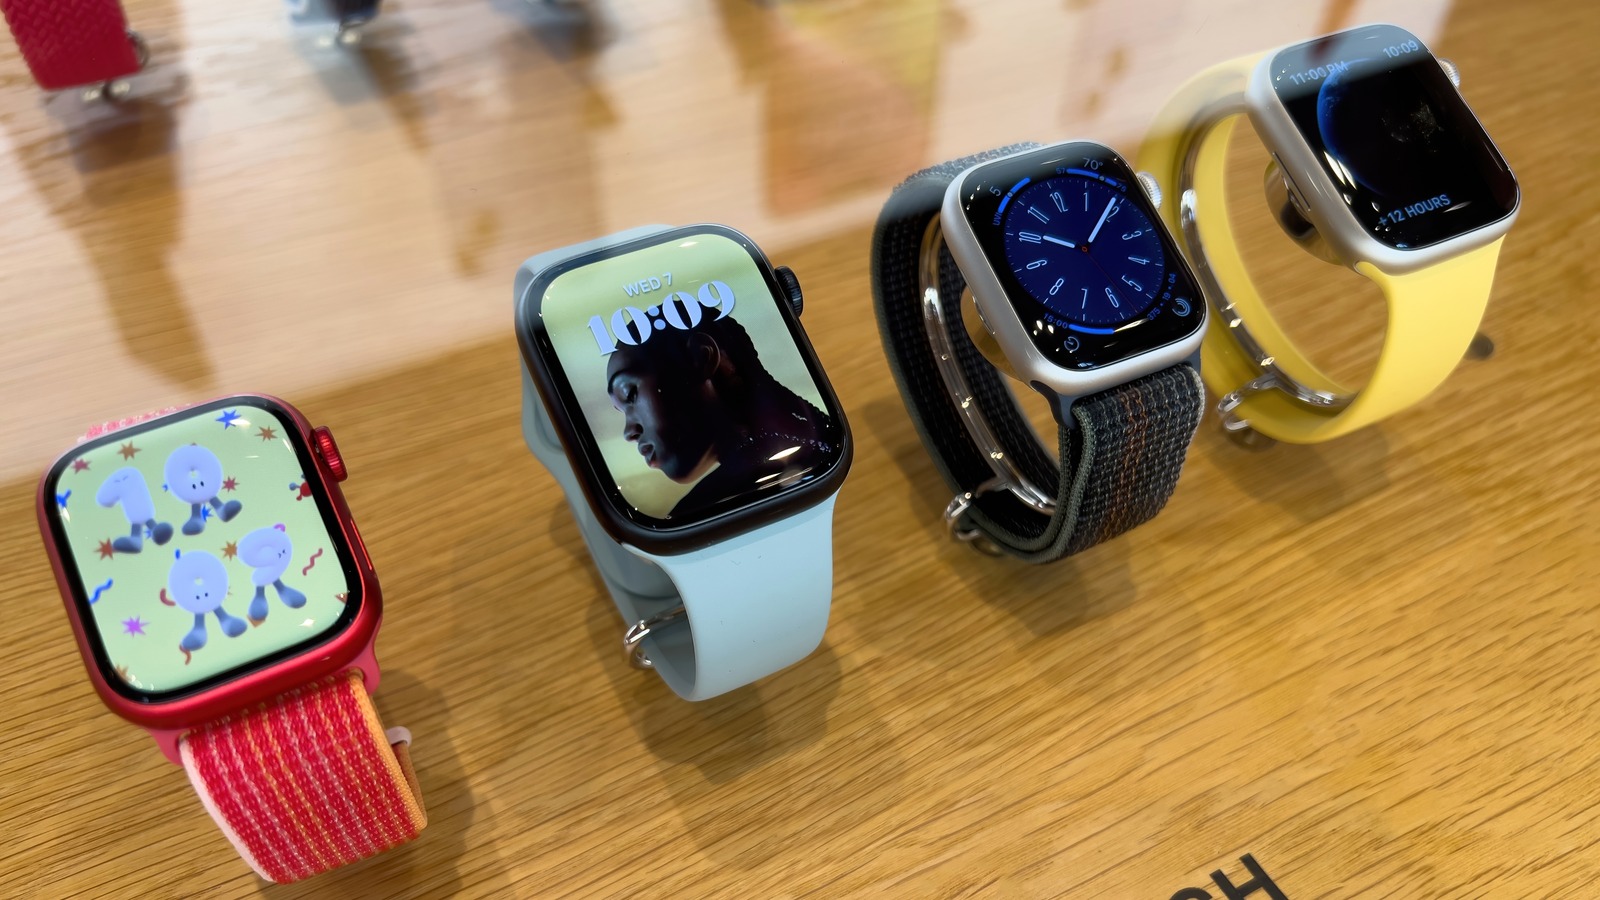 slashgear-asks-are-you-planning-to-upgrade-to-one-of-the-new-apple-watches-exclusive-survey